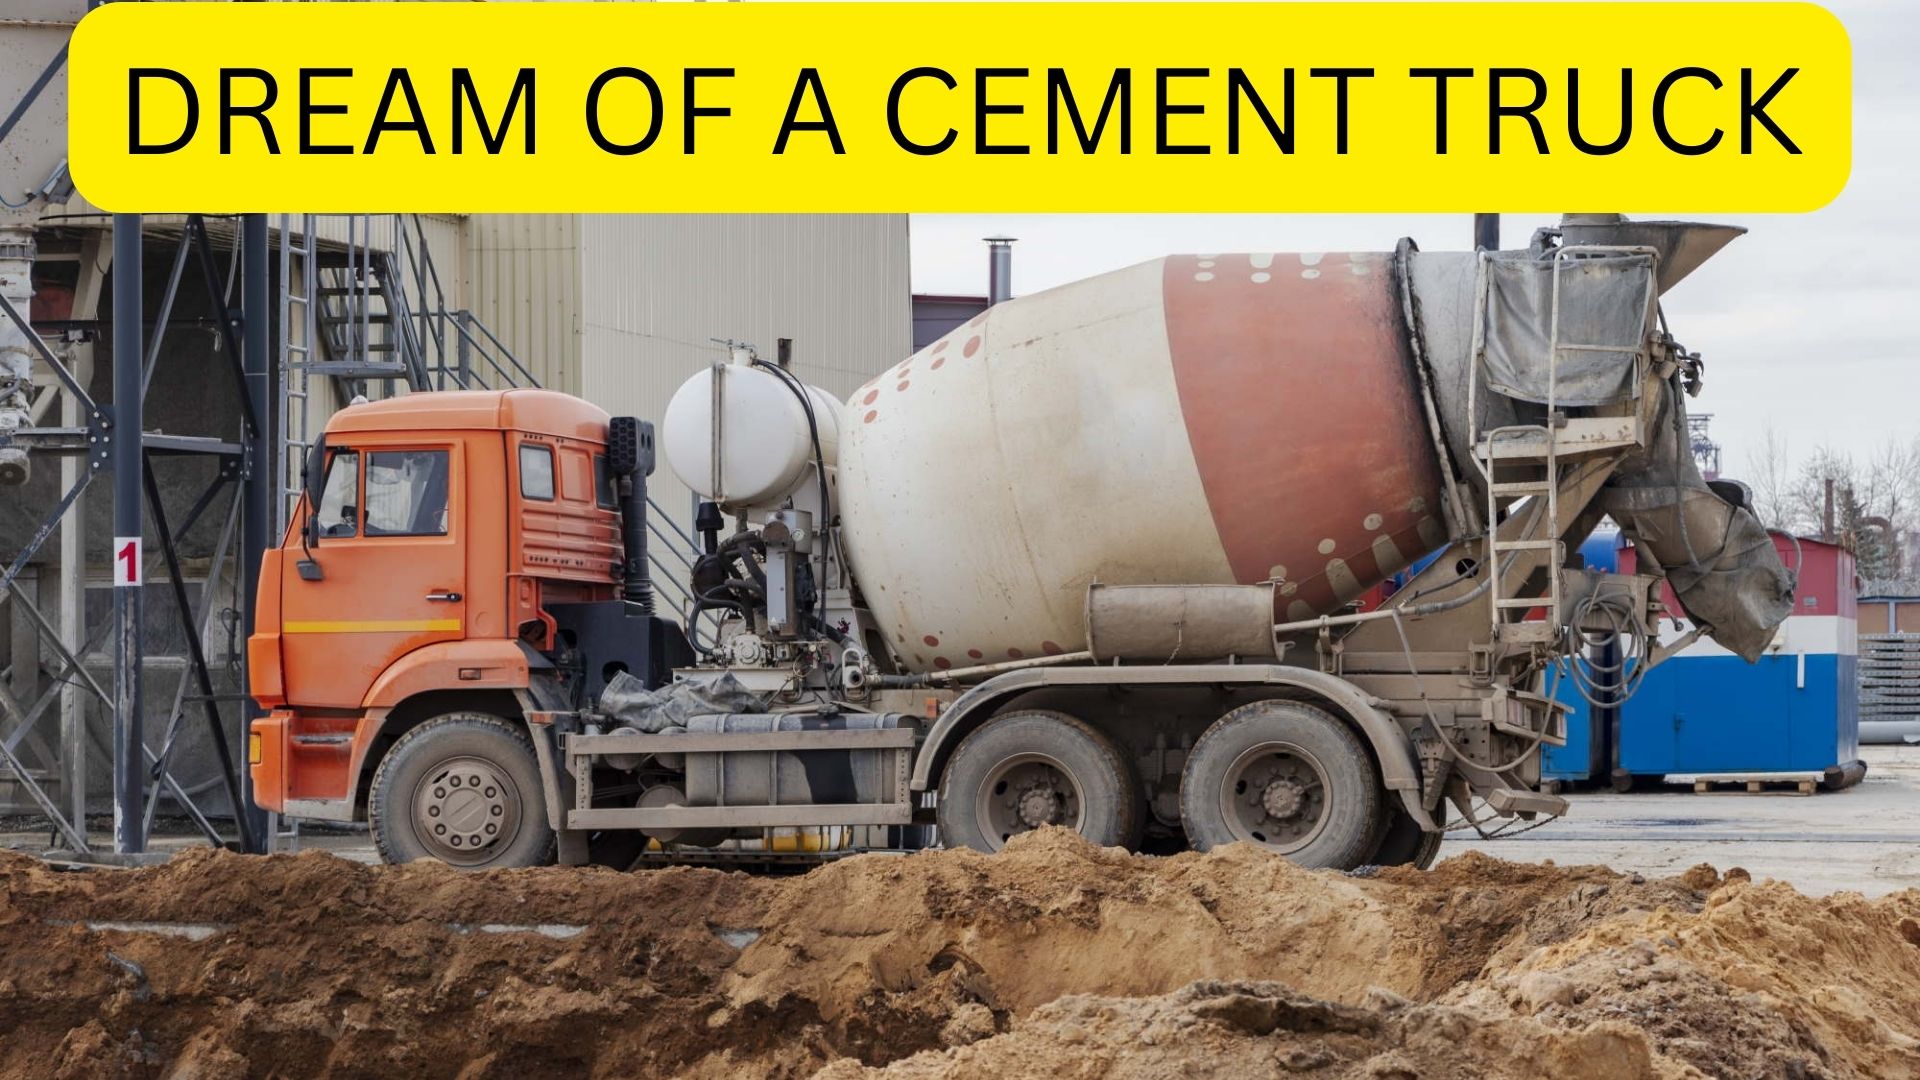 Dream Of A Cement Truck - Symbolizes Firm And Concrete Ideas Or Plans